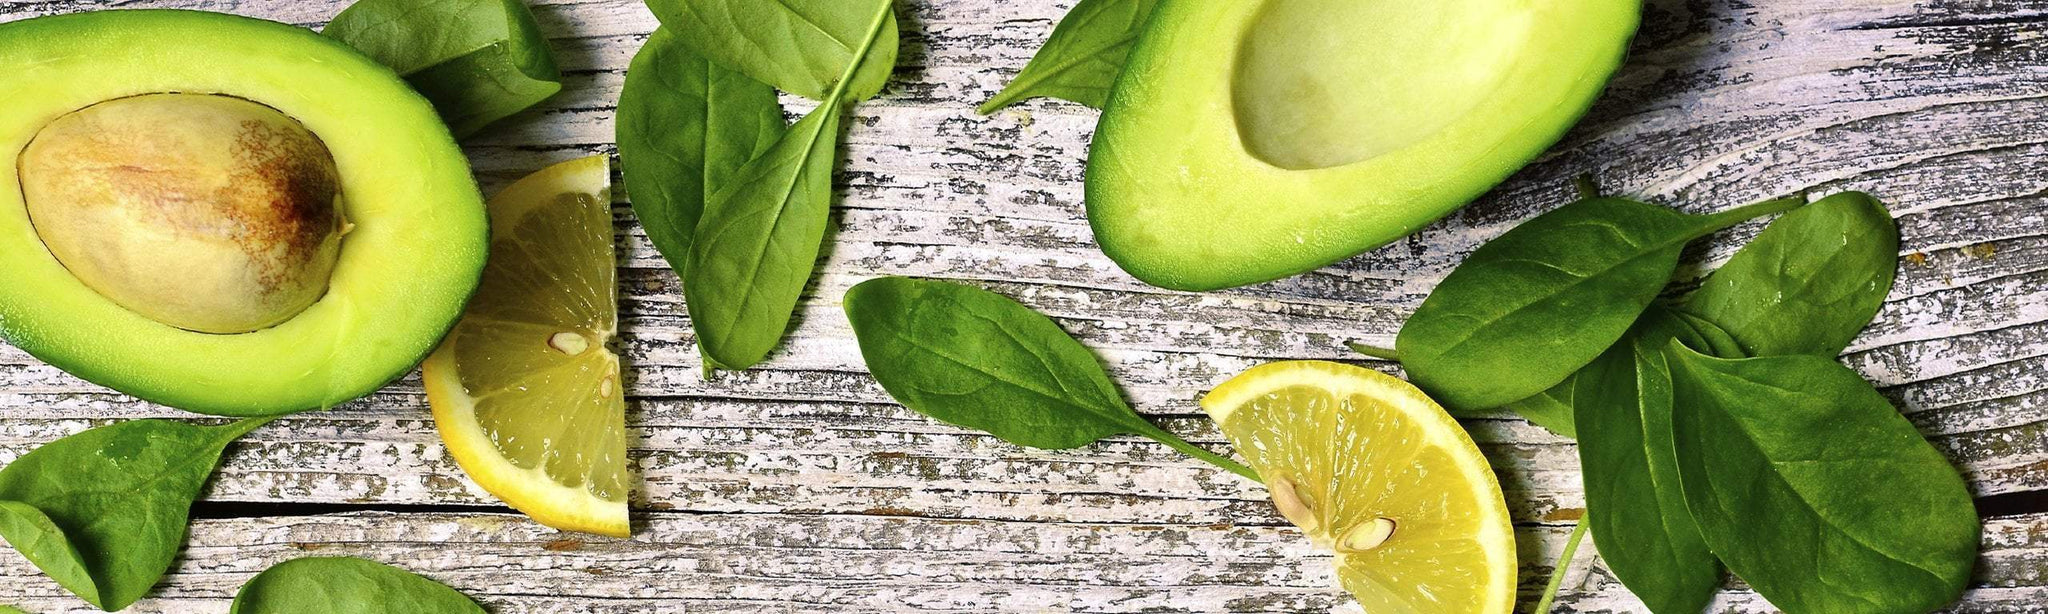 avocado, lemon slices and spinach leaves which can help different nutritional needs